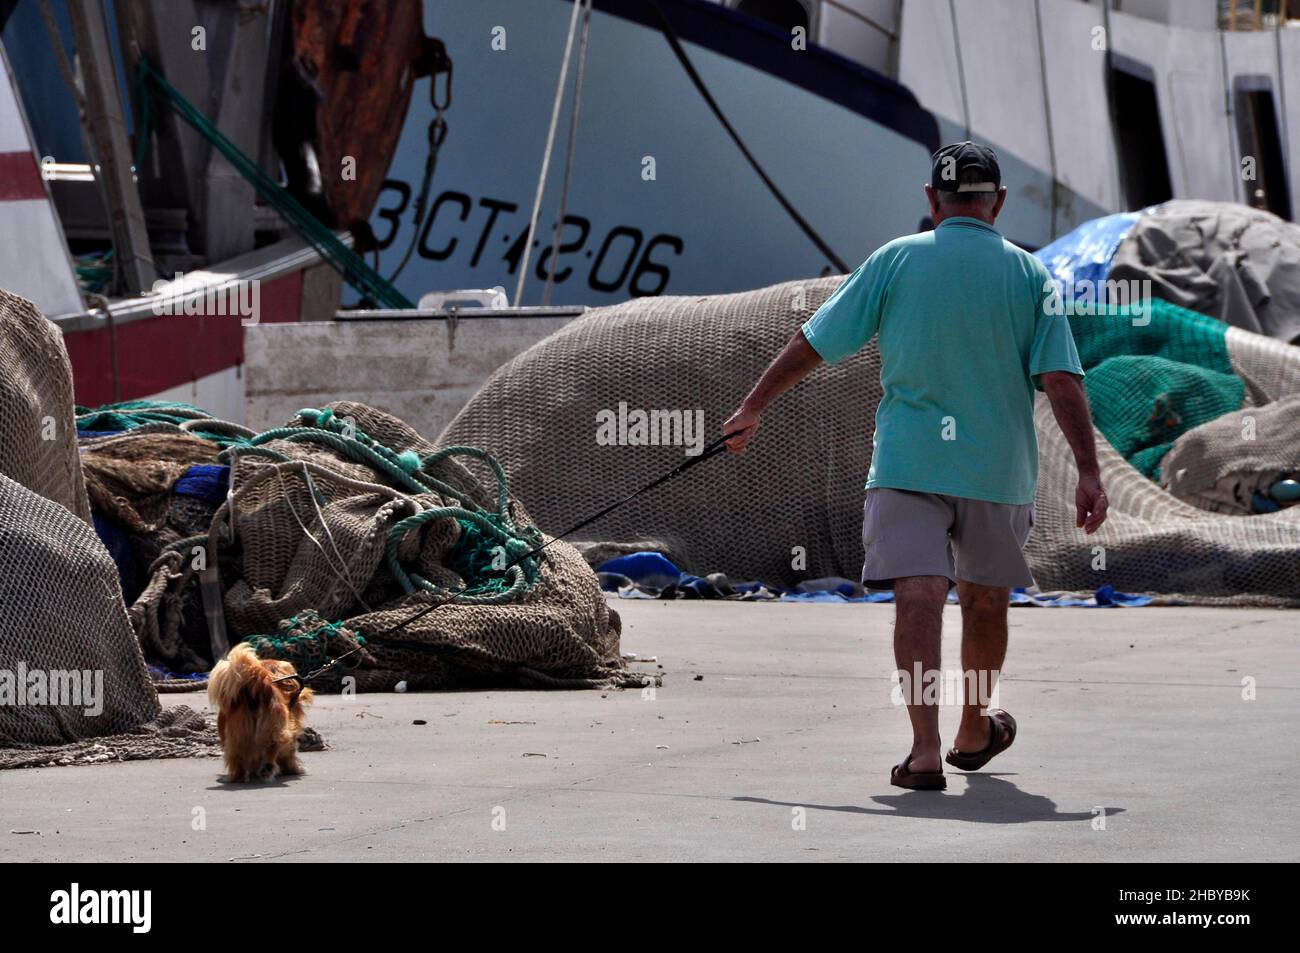 Master with dog on a leash in the harbour, Garrucha, Andalusia, Spain Stock Photo